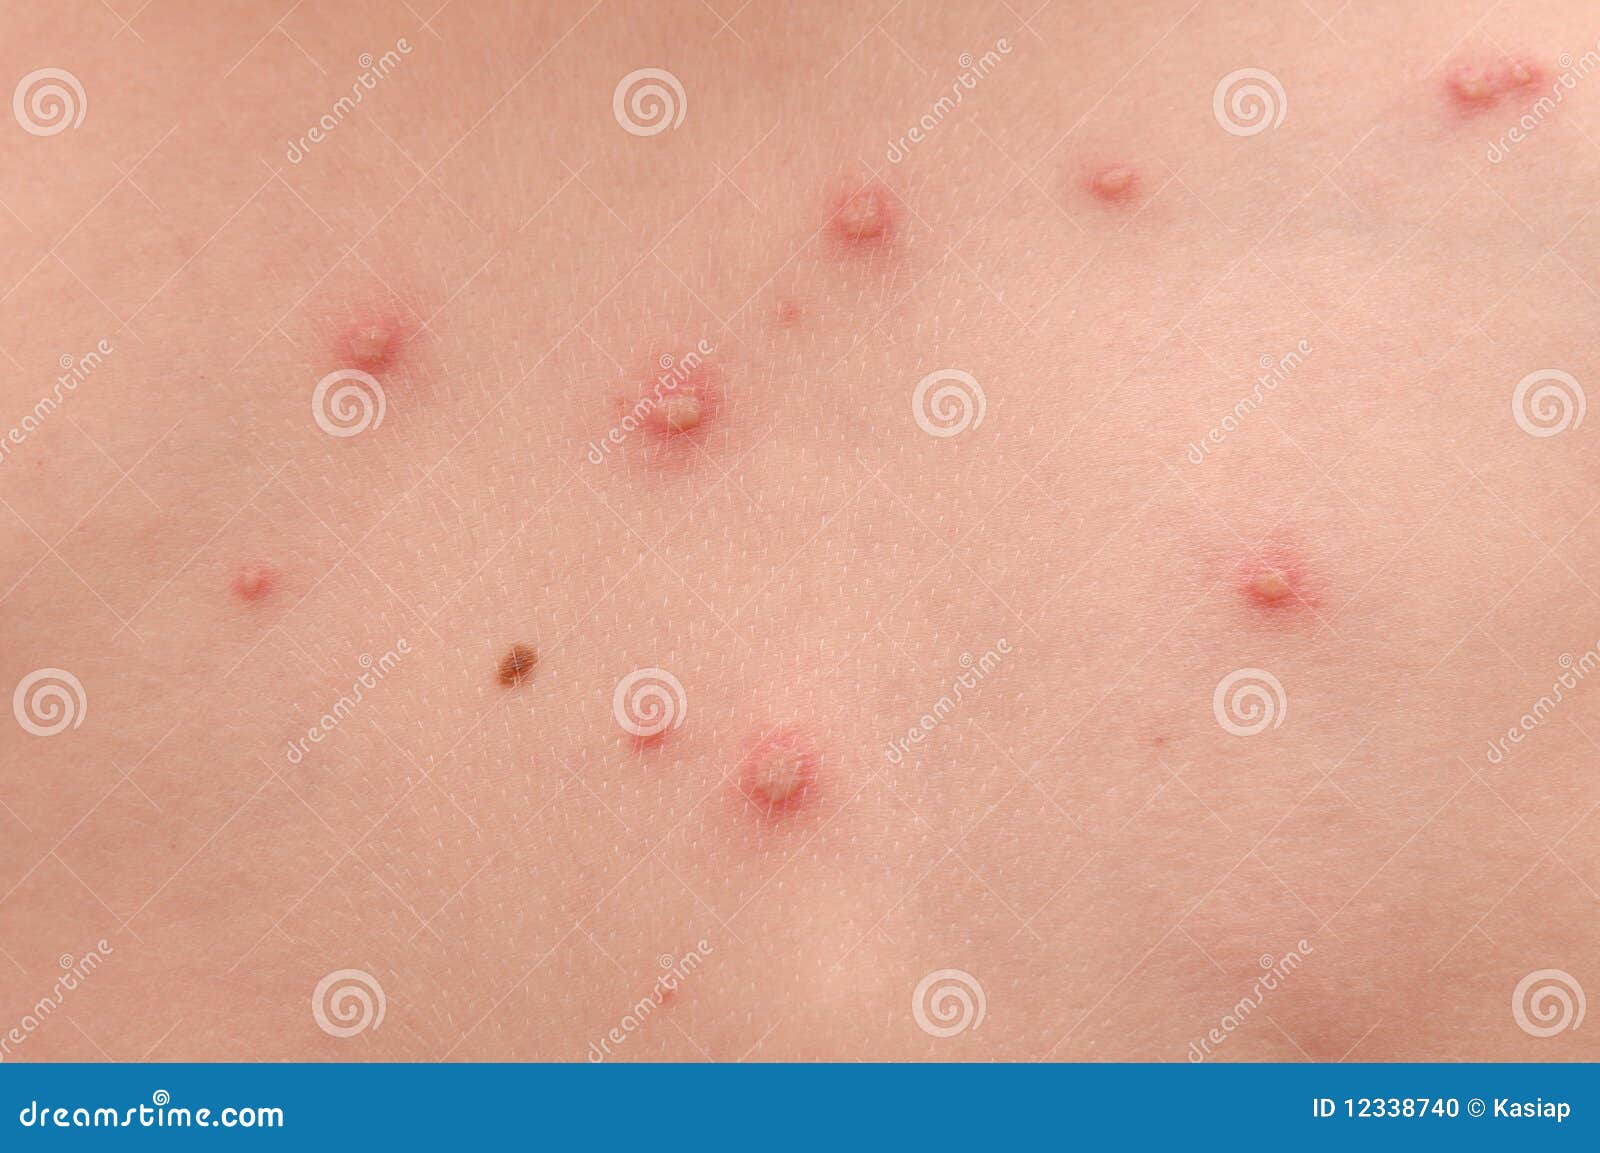 Rash: Get the Facts on Treatment of Various Types of Rashes